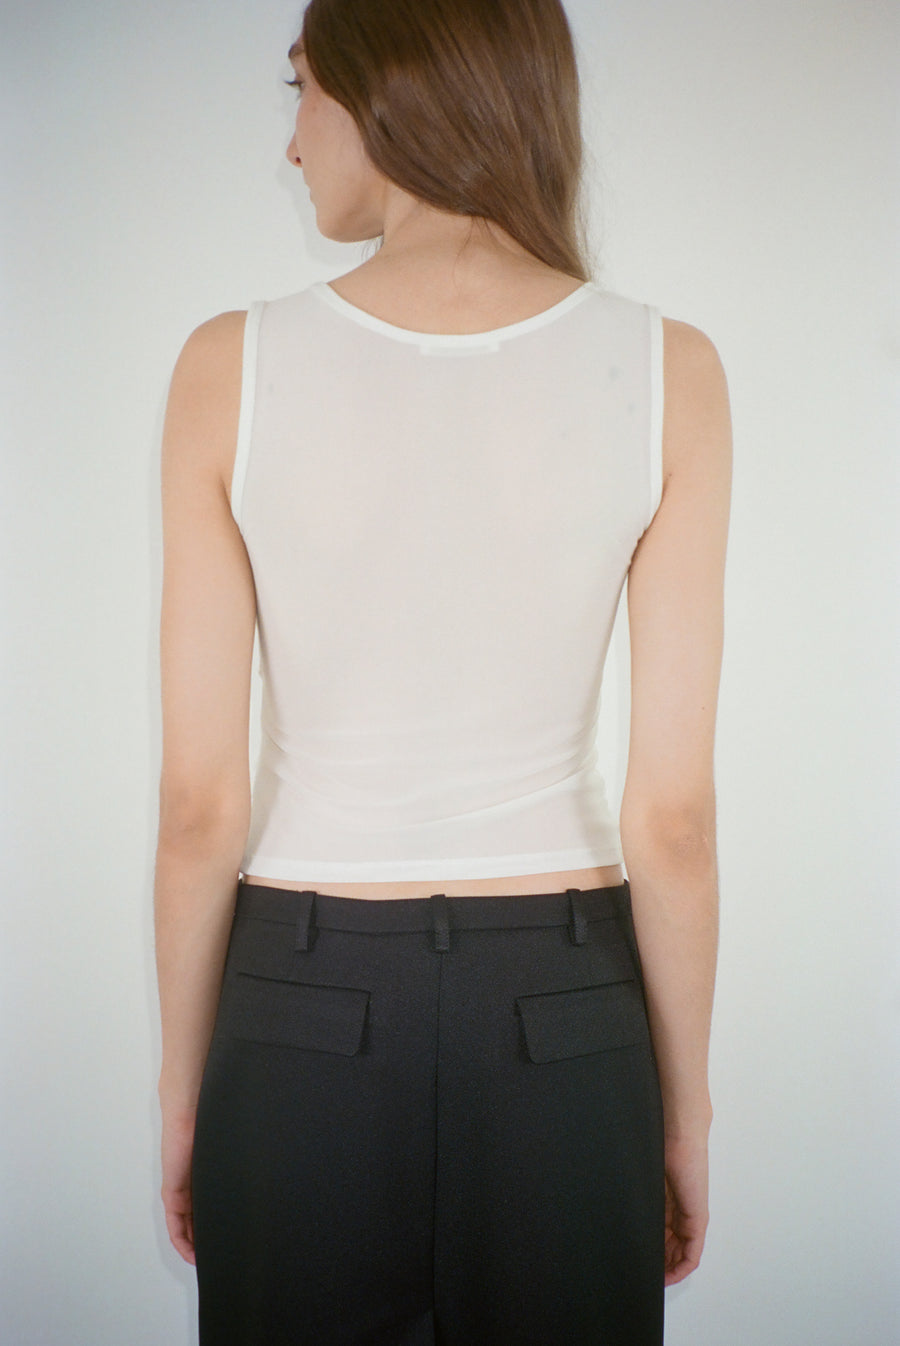 Mesh tank top in white with smocked jersey panel at front on model